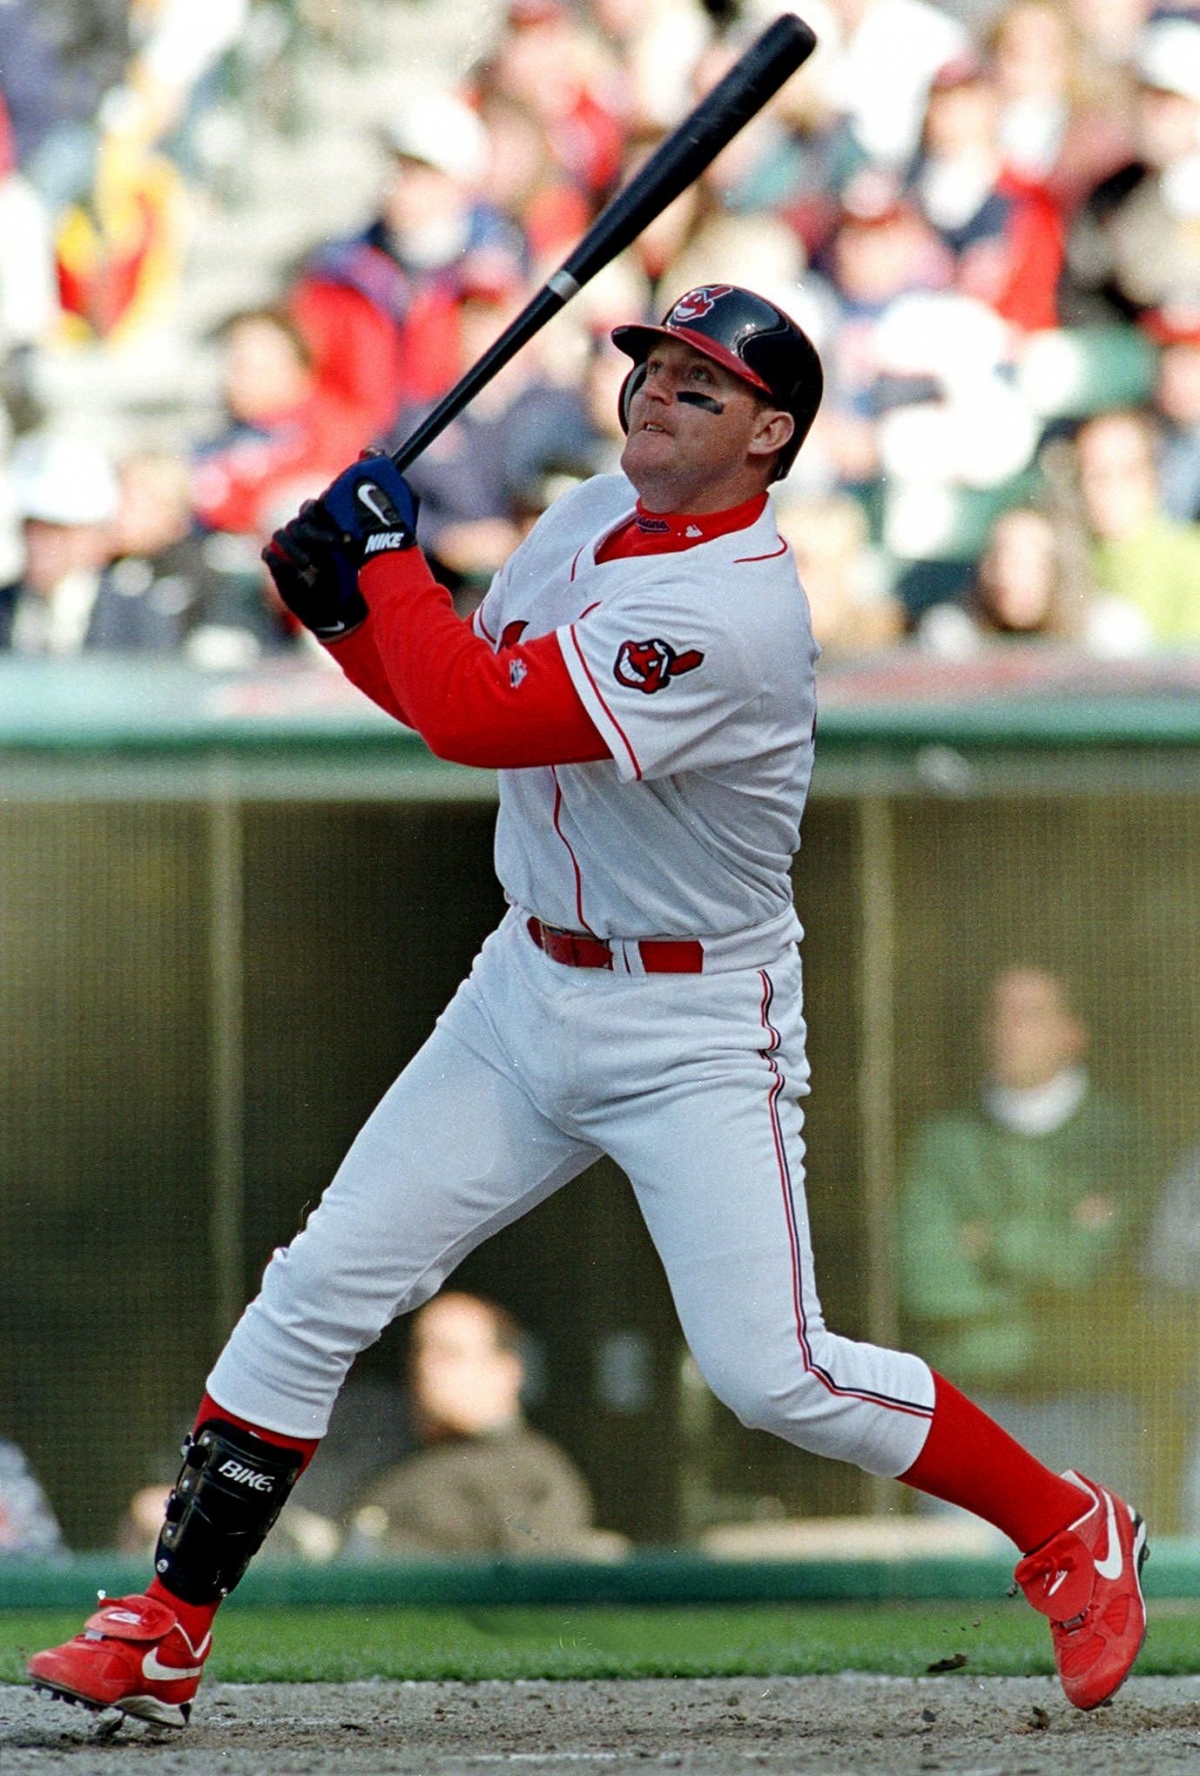 Not in Hall of Fame - 15. Jim Thome